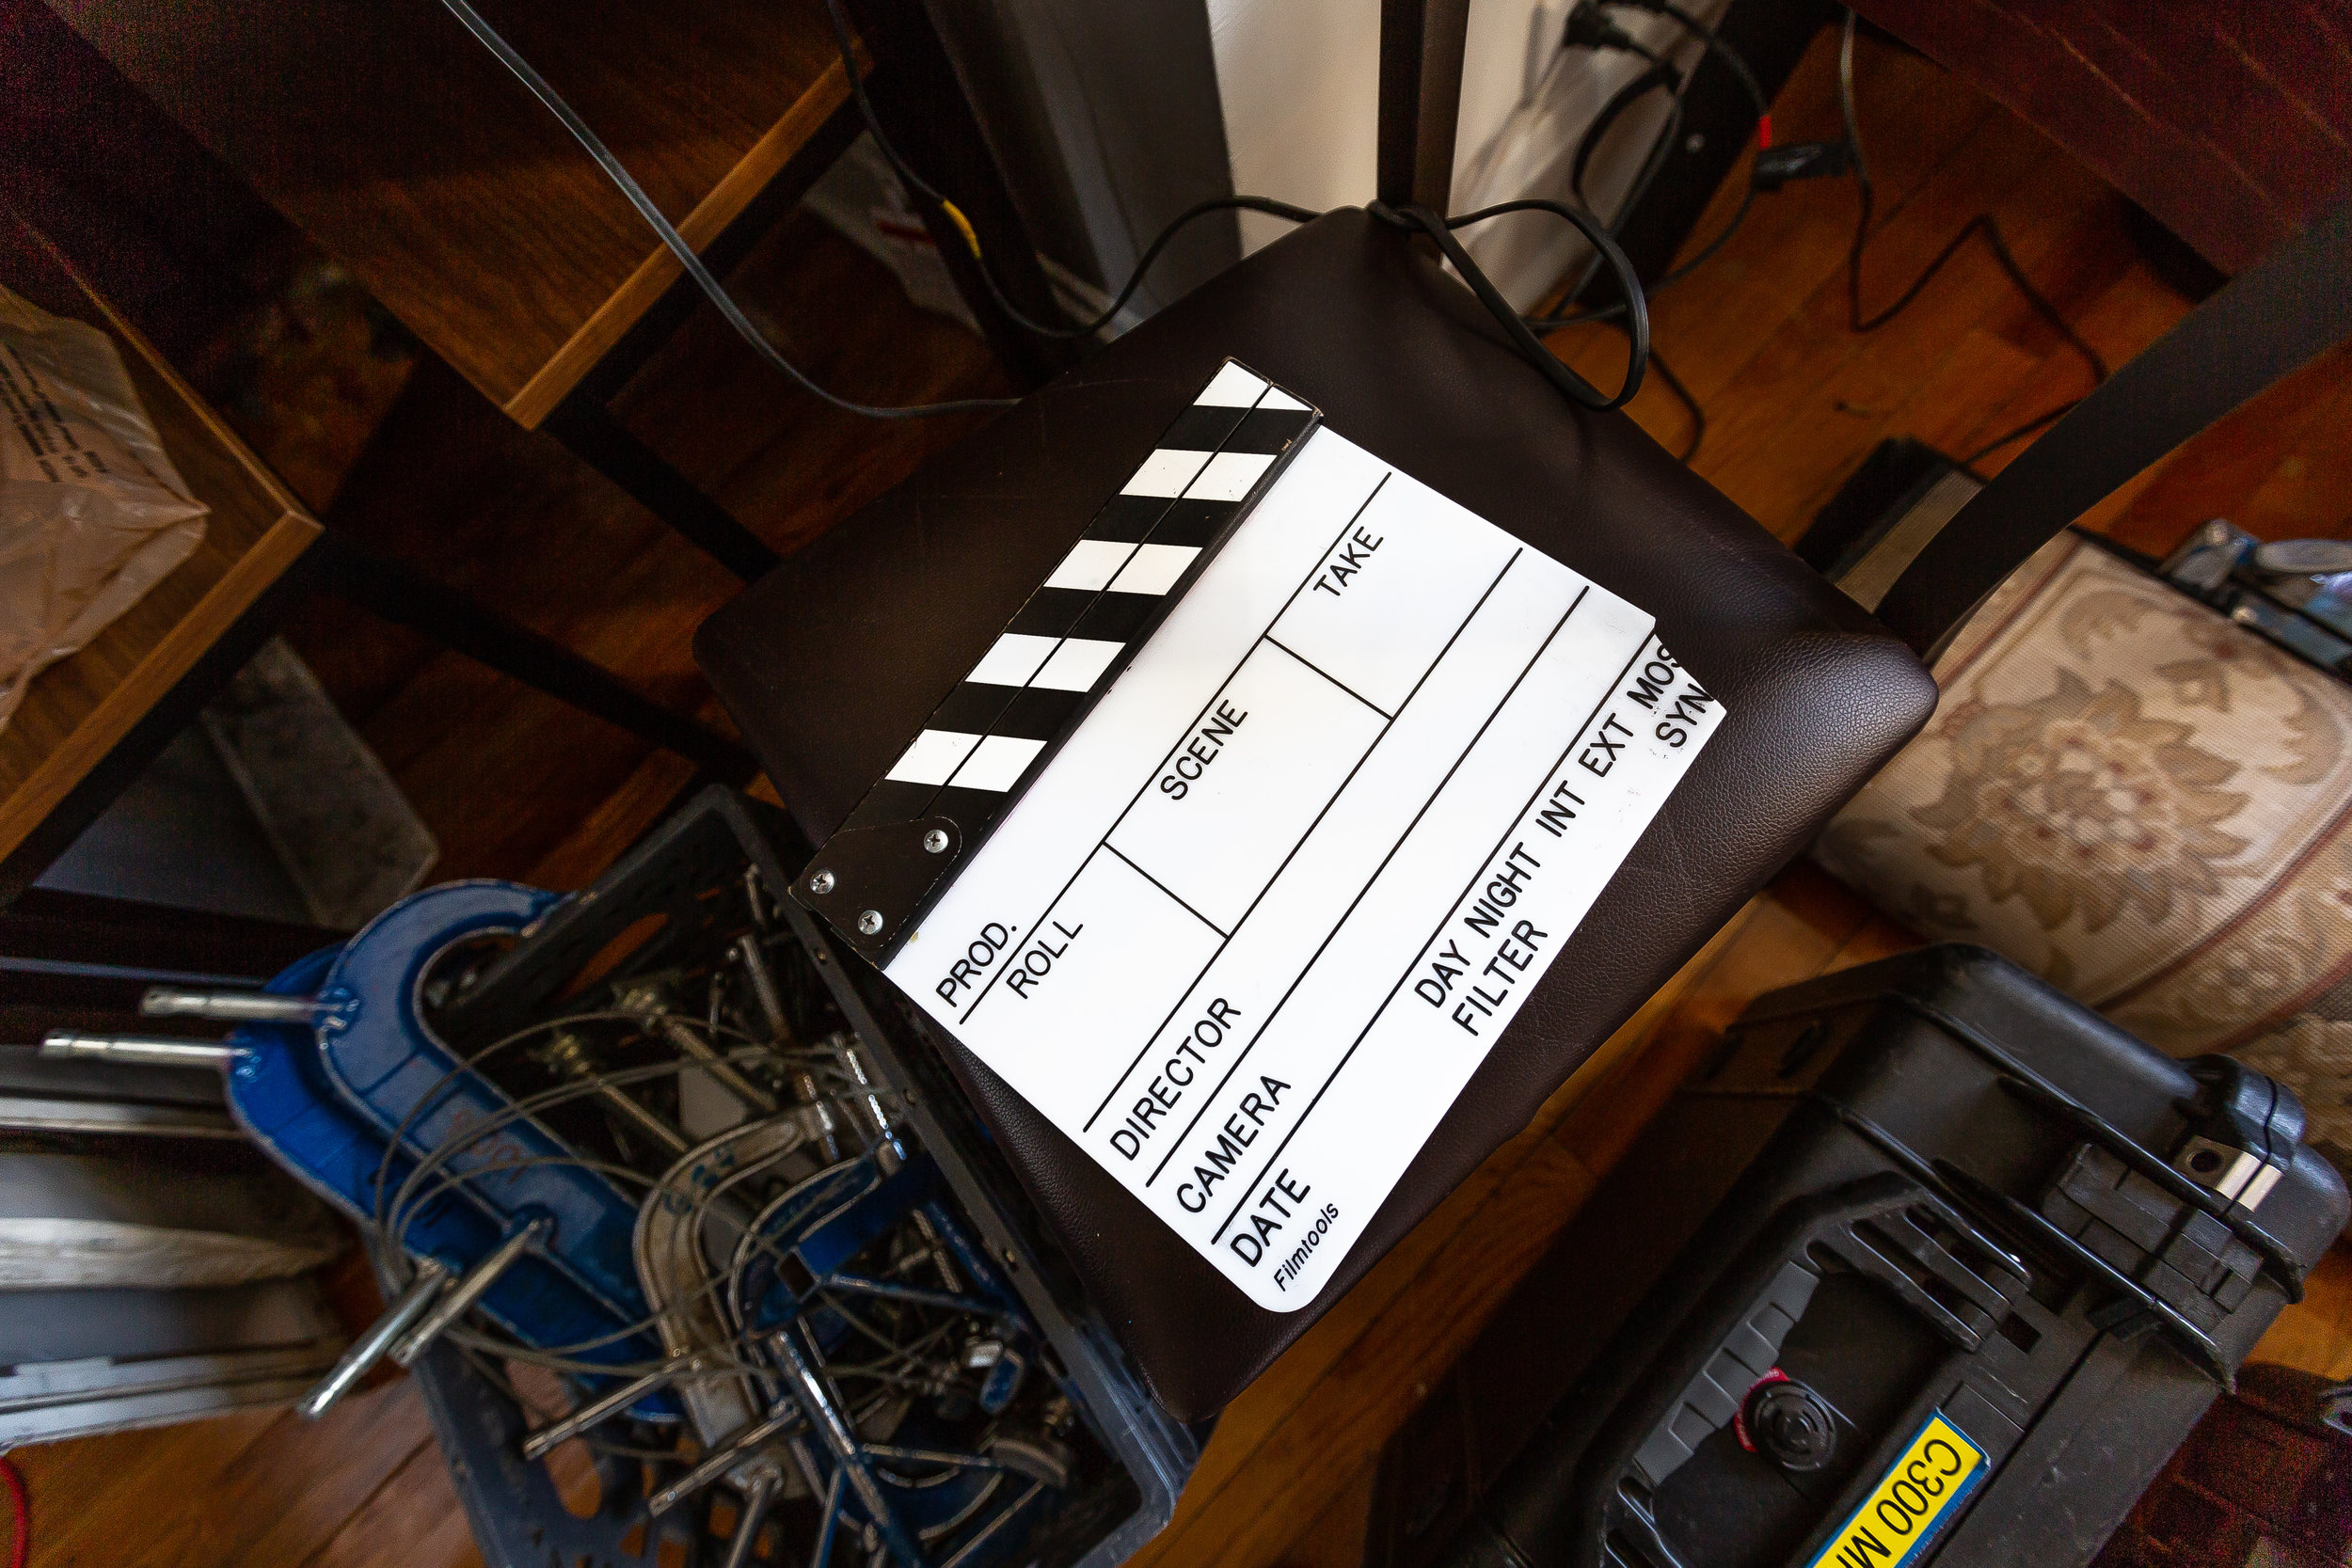 Behind the Scene Photograph of the film slate by Chicago Set Photographer Rashad Anabtawi (Copy)